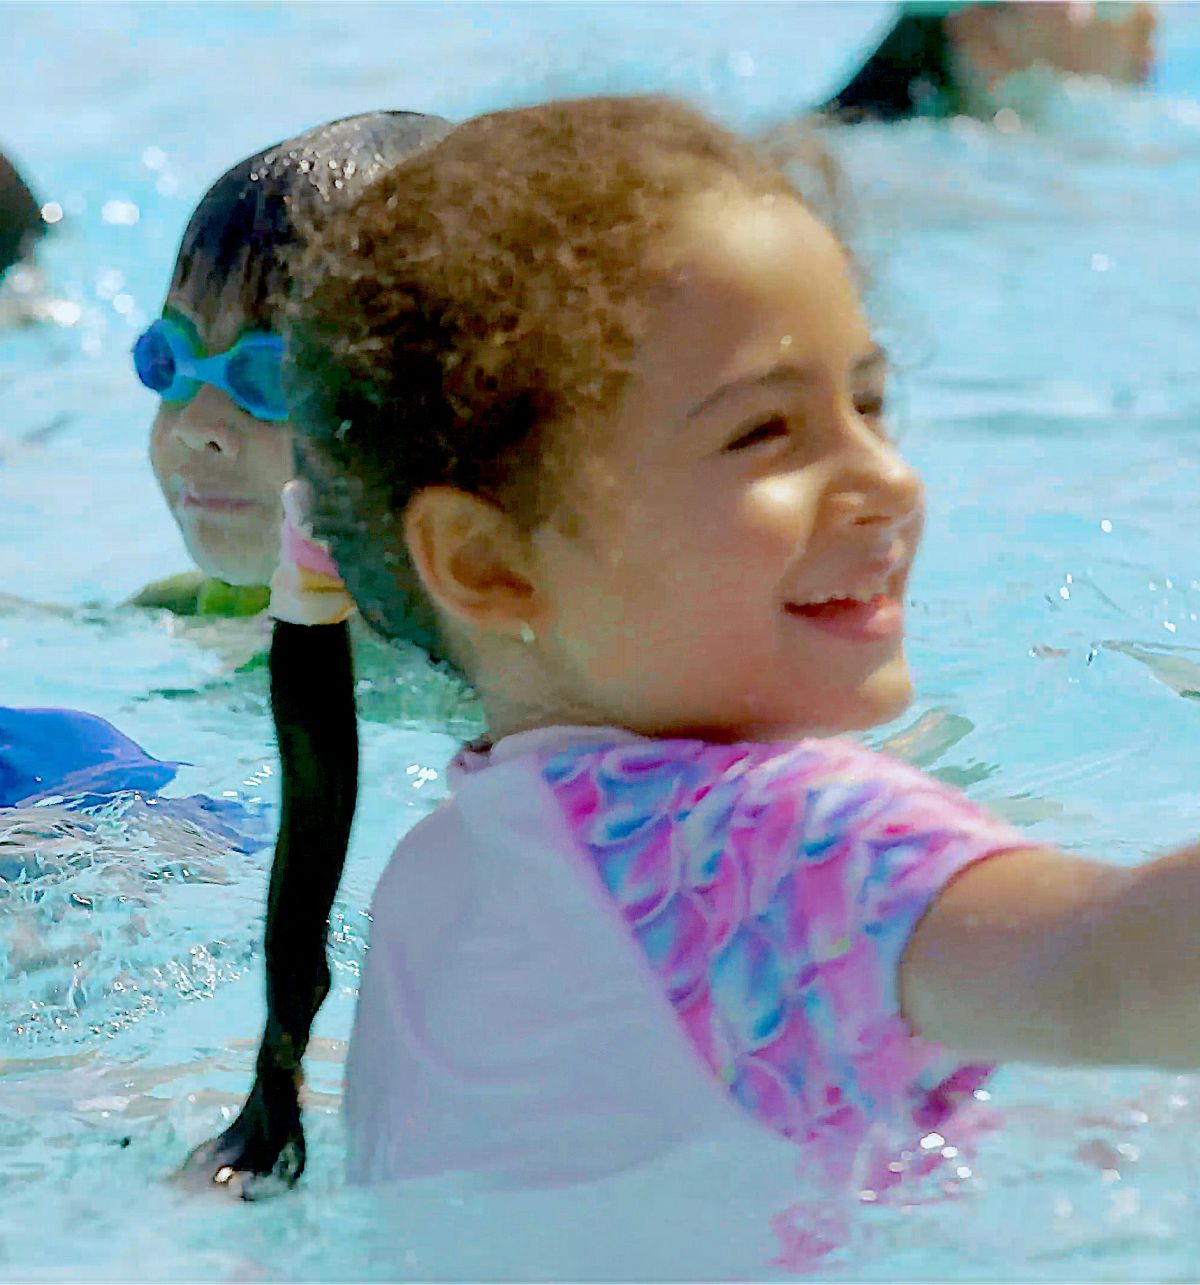 Summer Camps Are Making a Splash! Latest news from Private Elementary